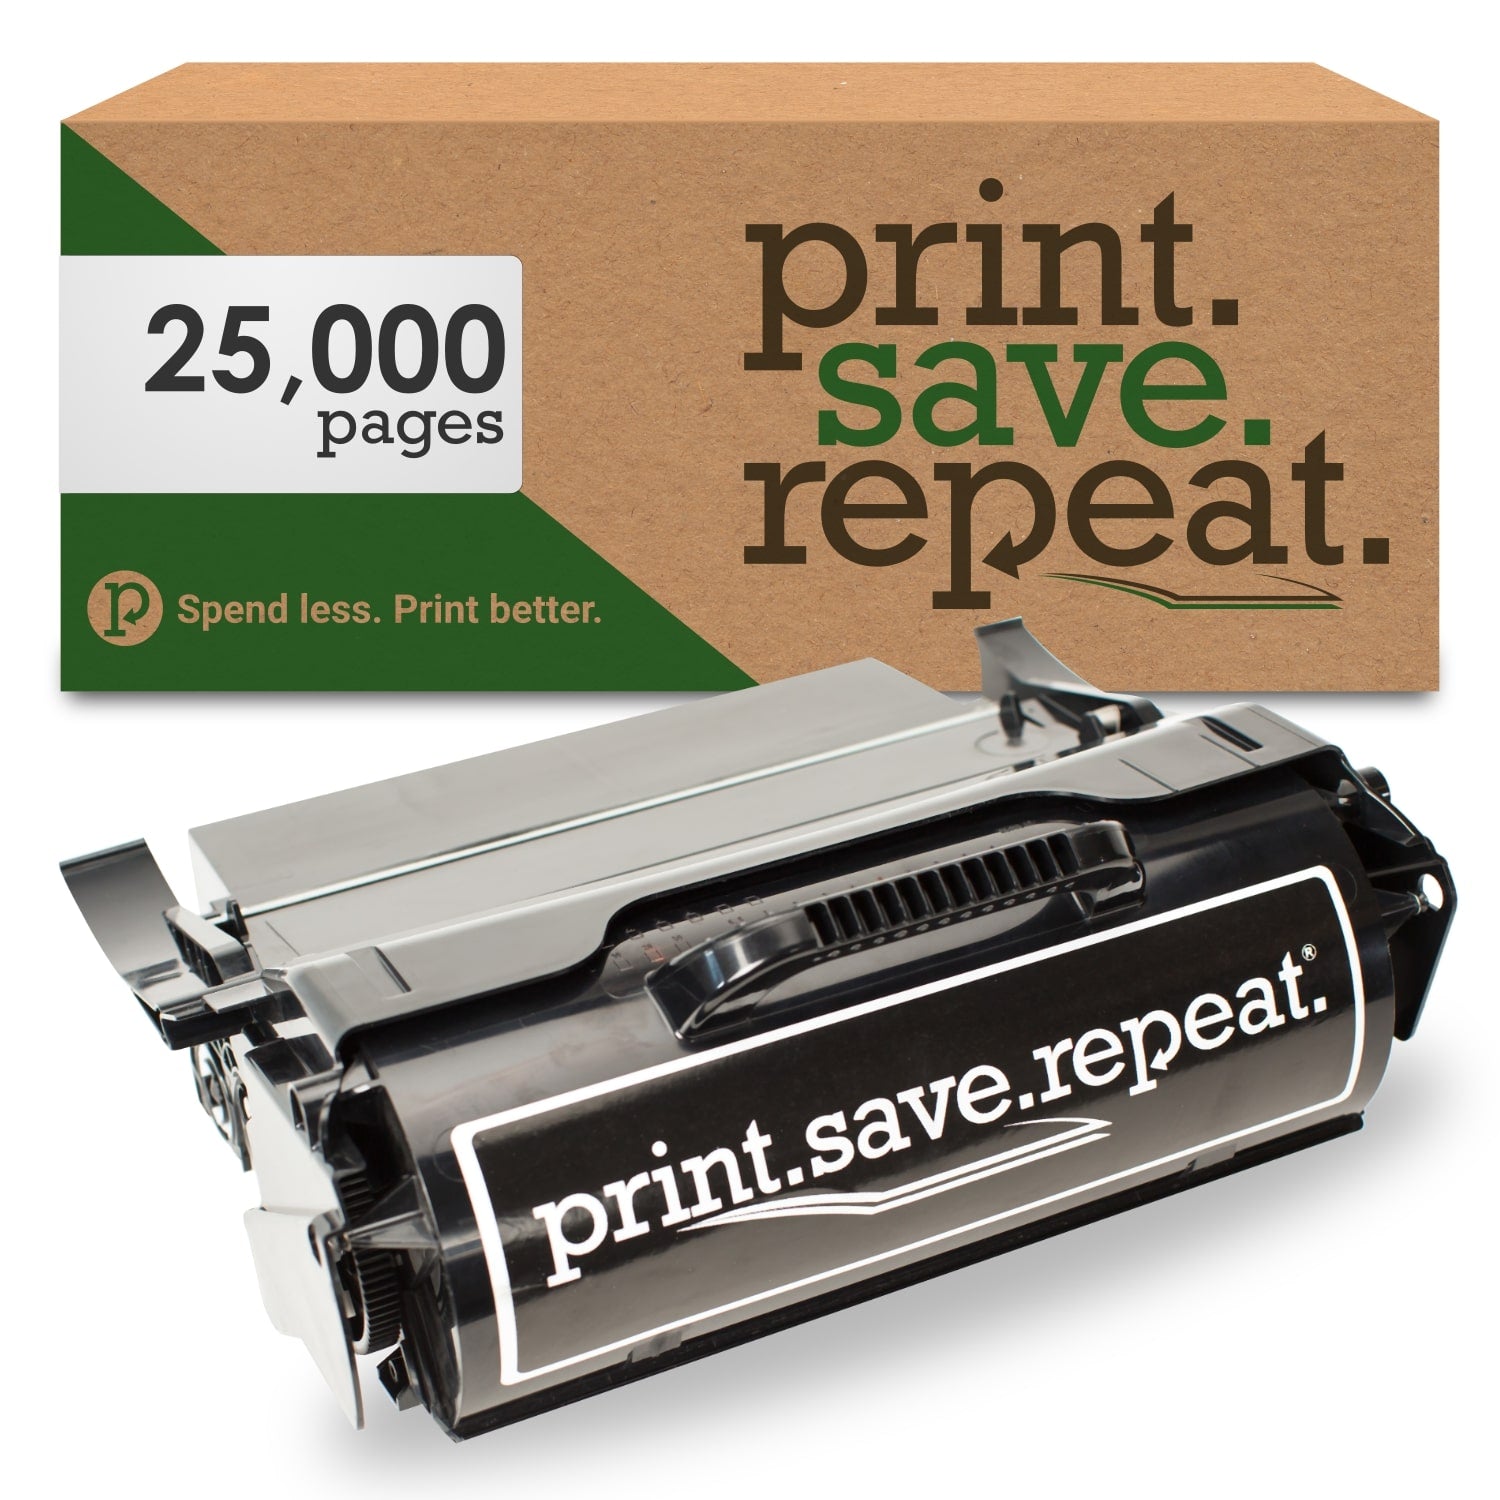 Print.Save.Repeat. Lexmark X651H04A High Yield Remanufactured Label Applications Toner Cartridge for X651, X652, X654, X656, X658 [25,000 Pages]